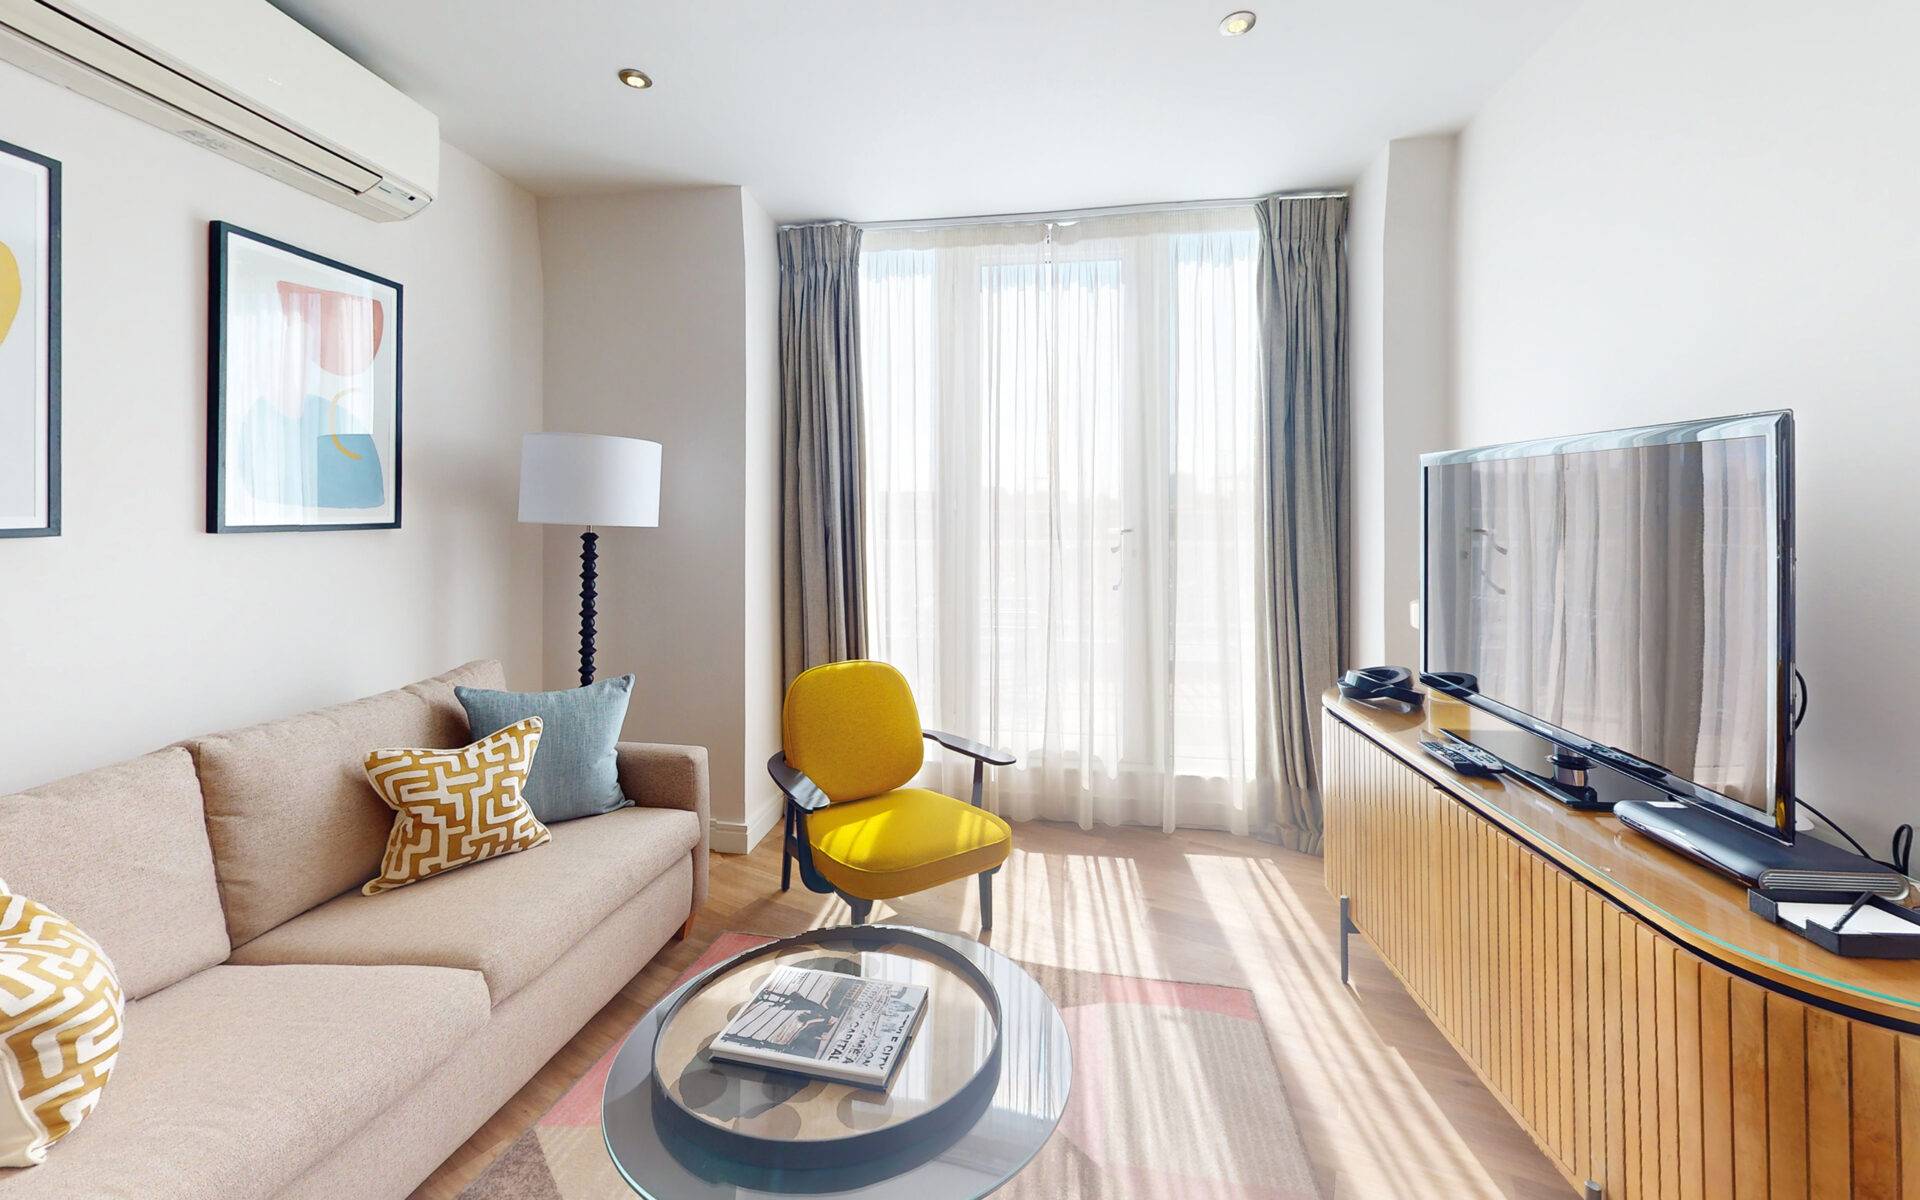 Three-Bedroom Serviced Apartment with Luxury Amenities in Trendy South Kensington